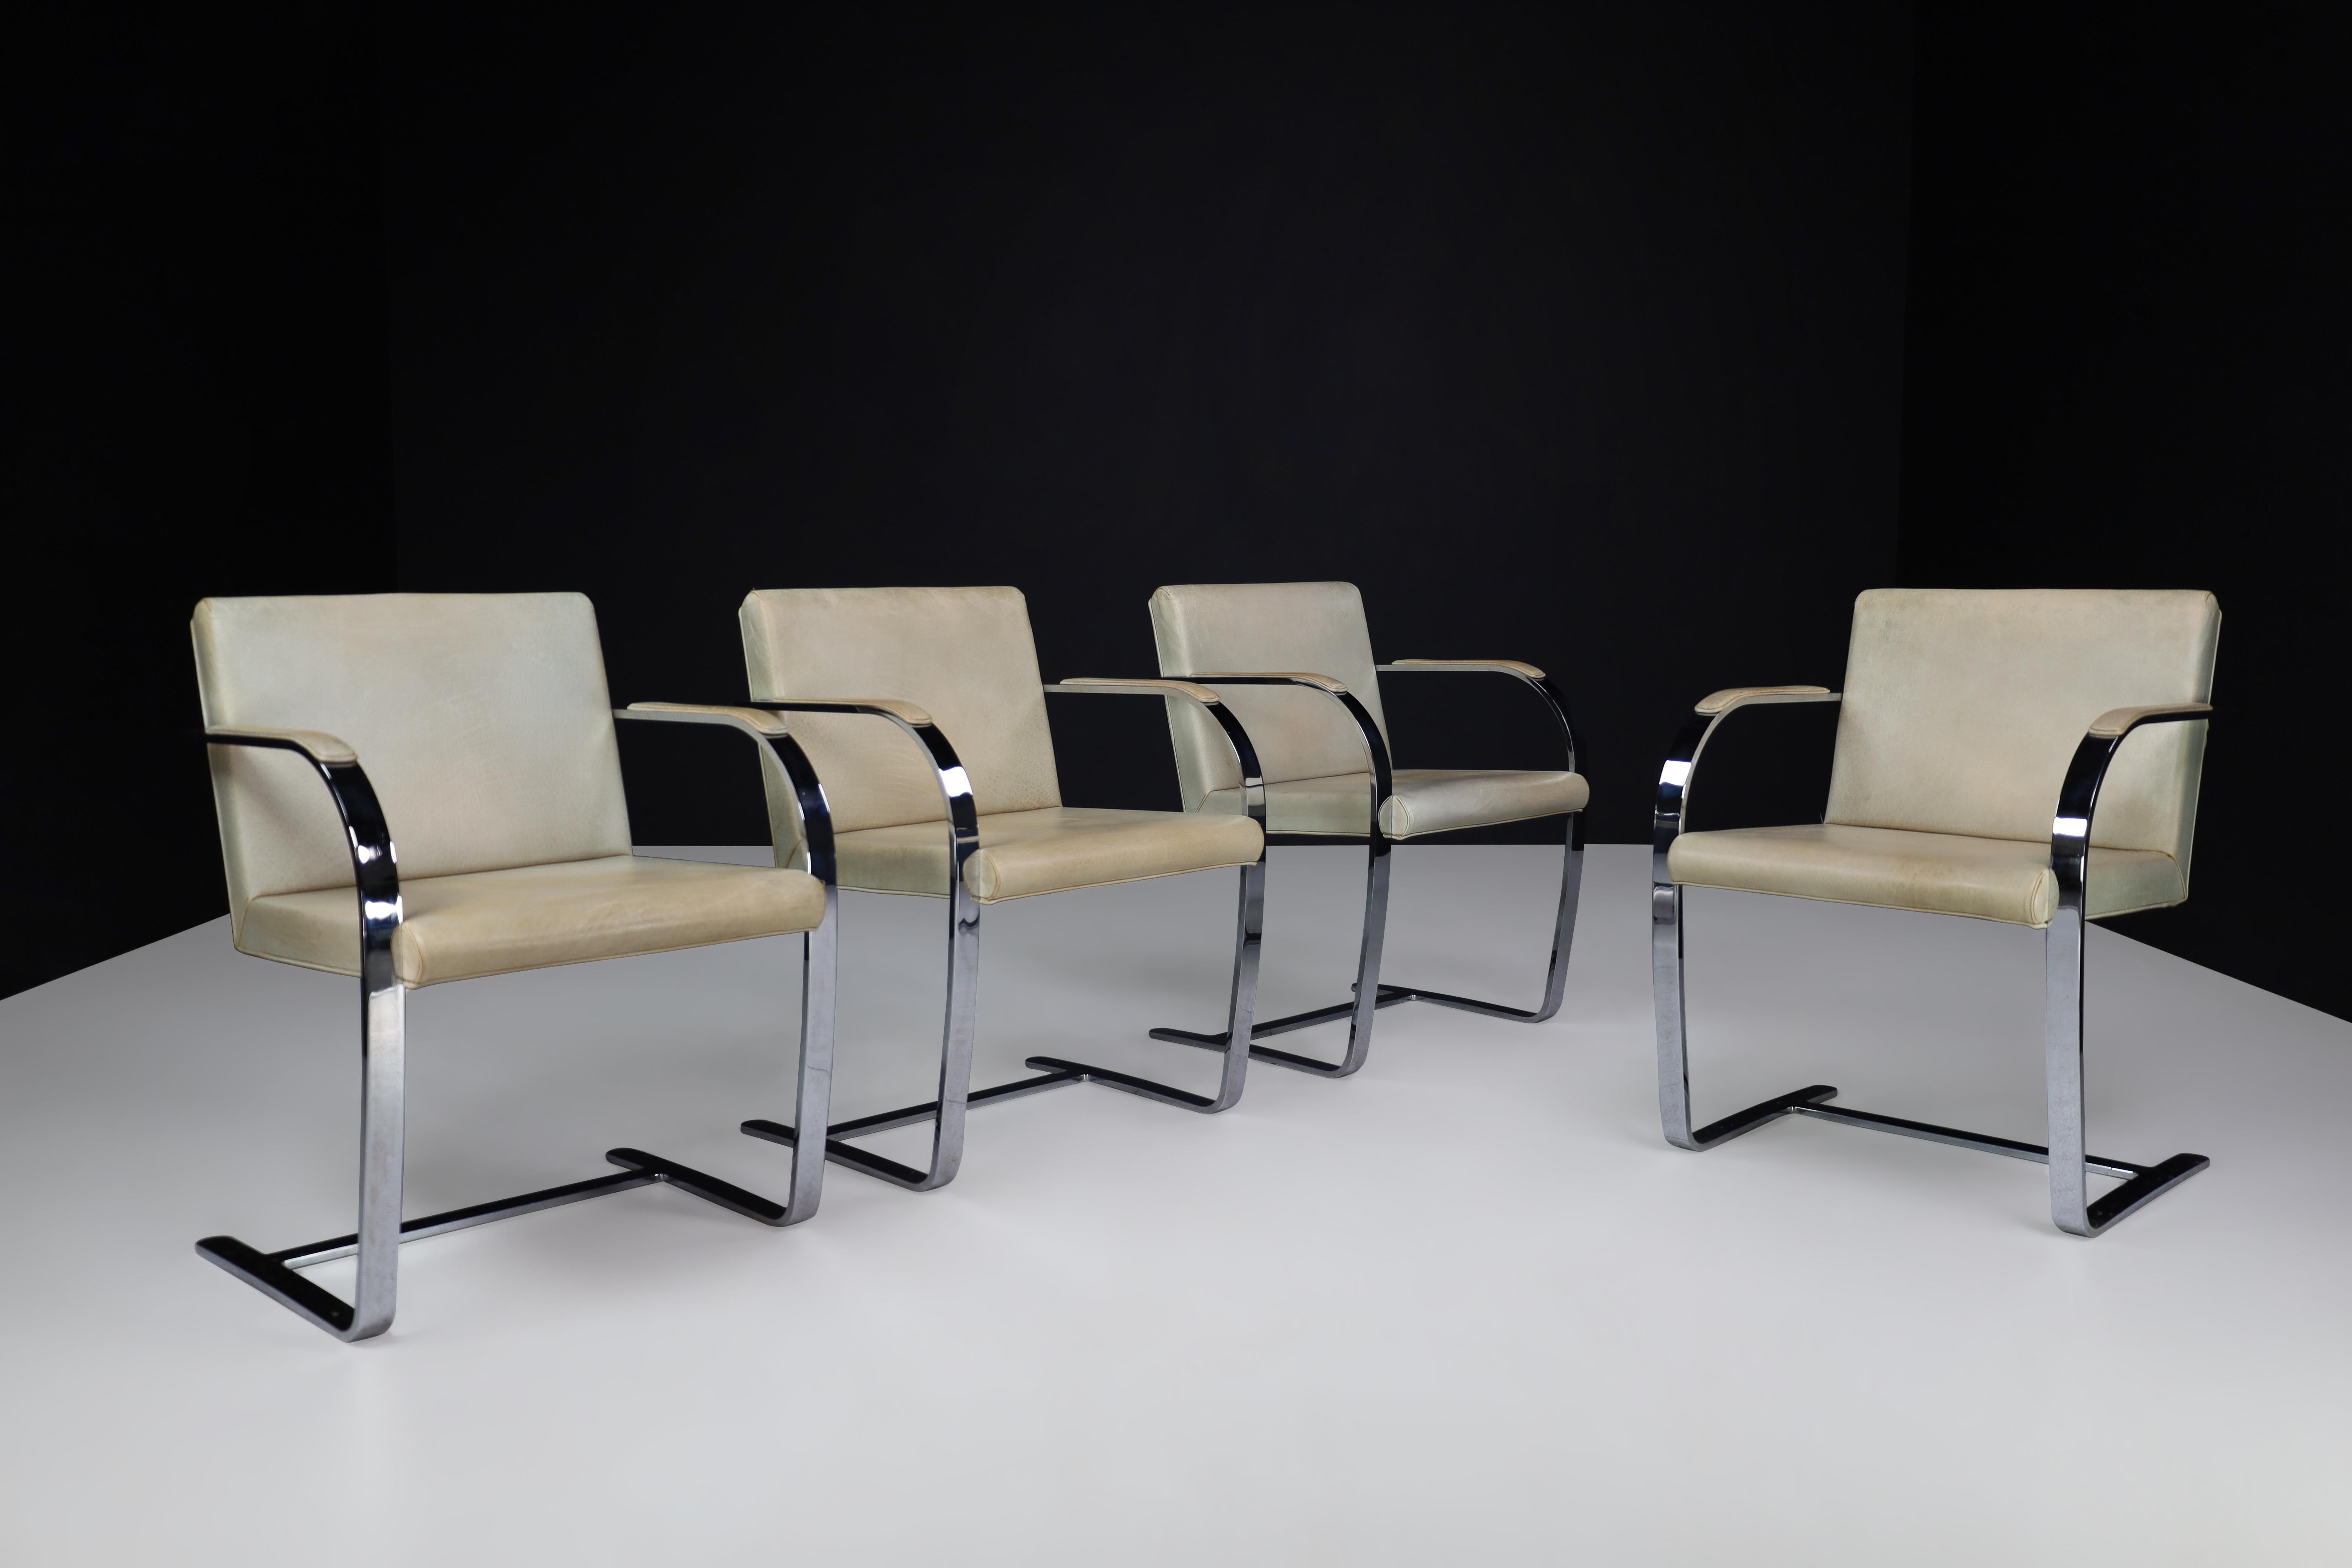 Mies van der Rohe Brno Armchairs in Leather and Chrome.

This set of four Mies van der Rohe Brno armchairs, model 255, in polished chrome-plated flat bar steel with original leather seats. These iconic Bauhaus modernist chairs Mies van der Rohe